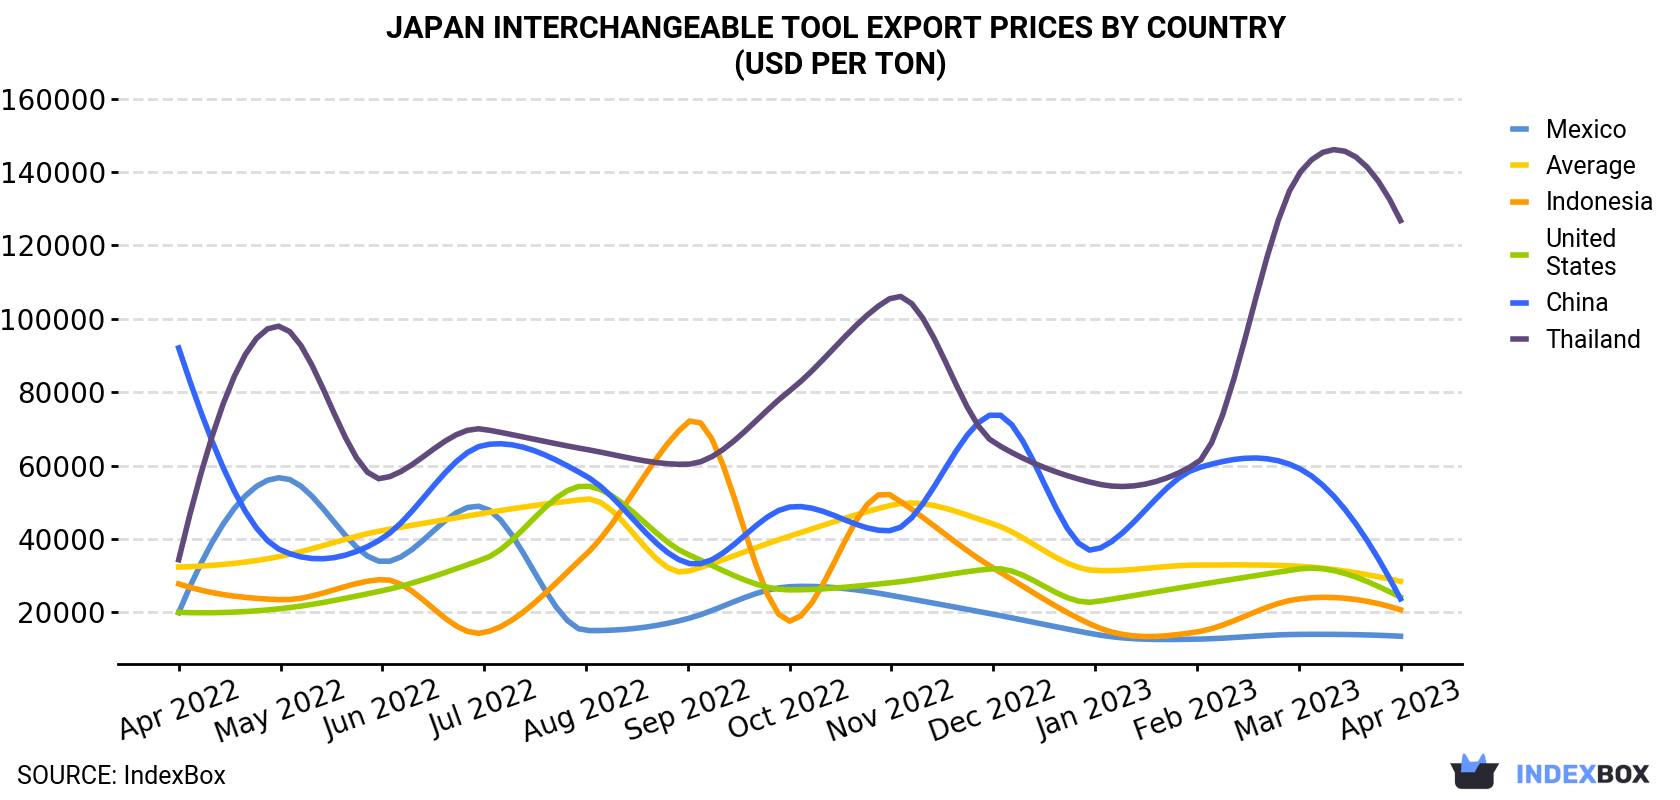 Japan Interchangeable Tool Export Prices By Country (USD Per Ton)